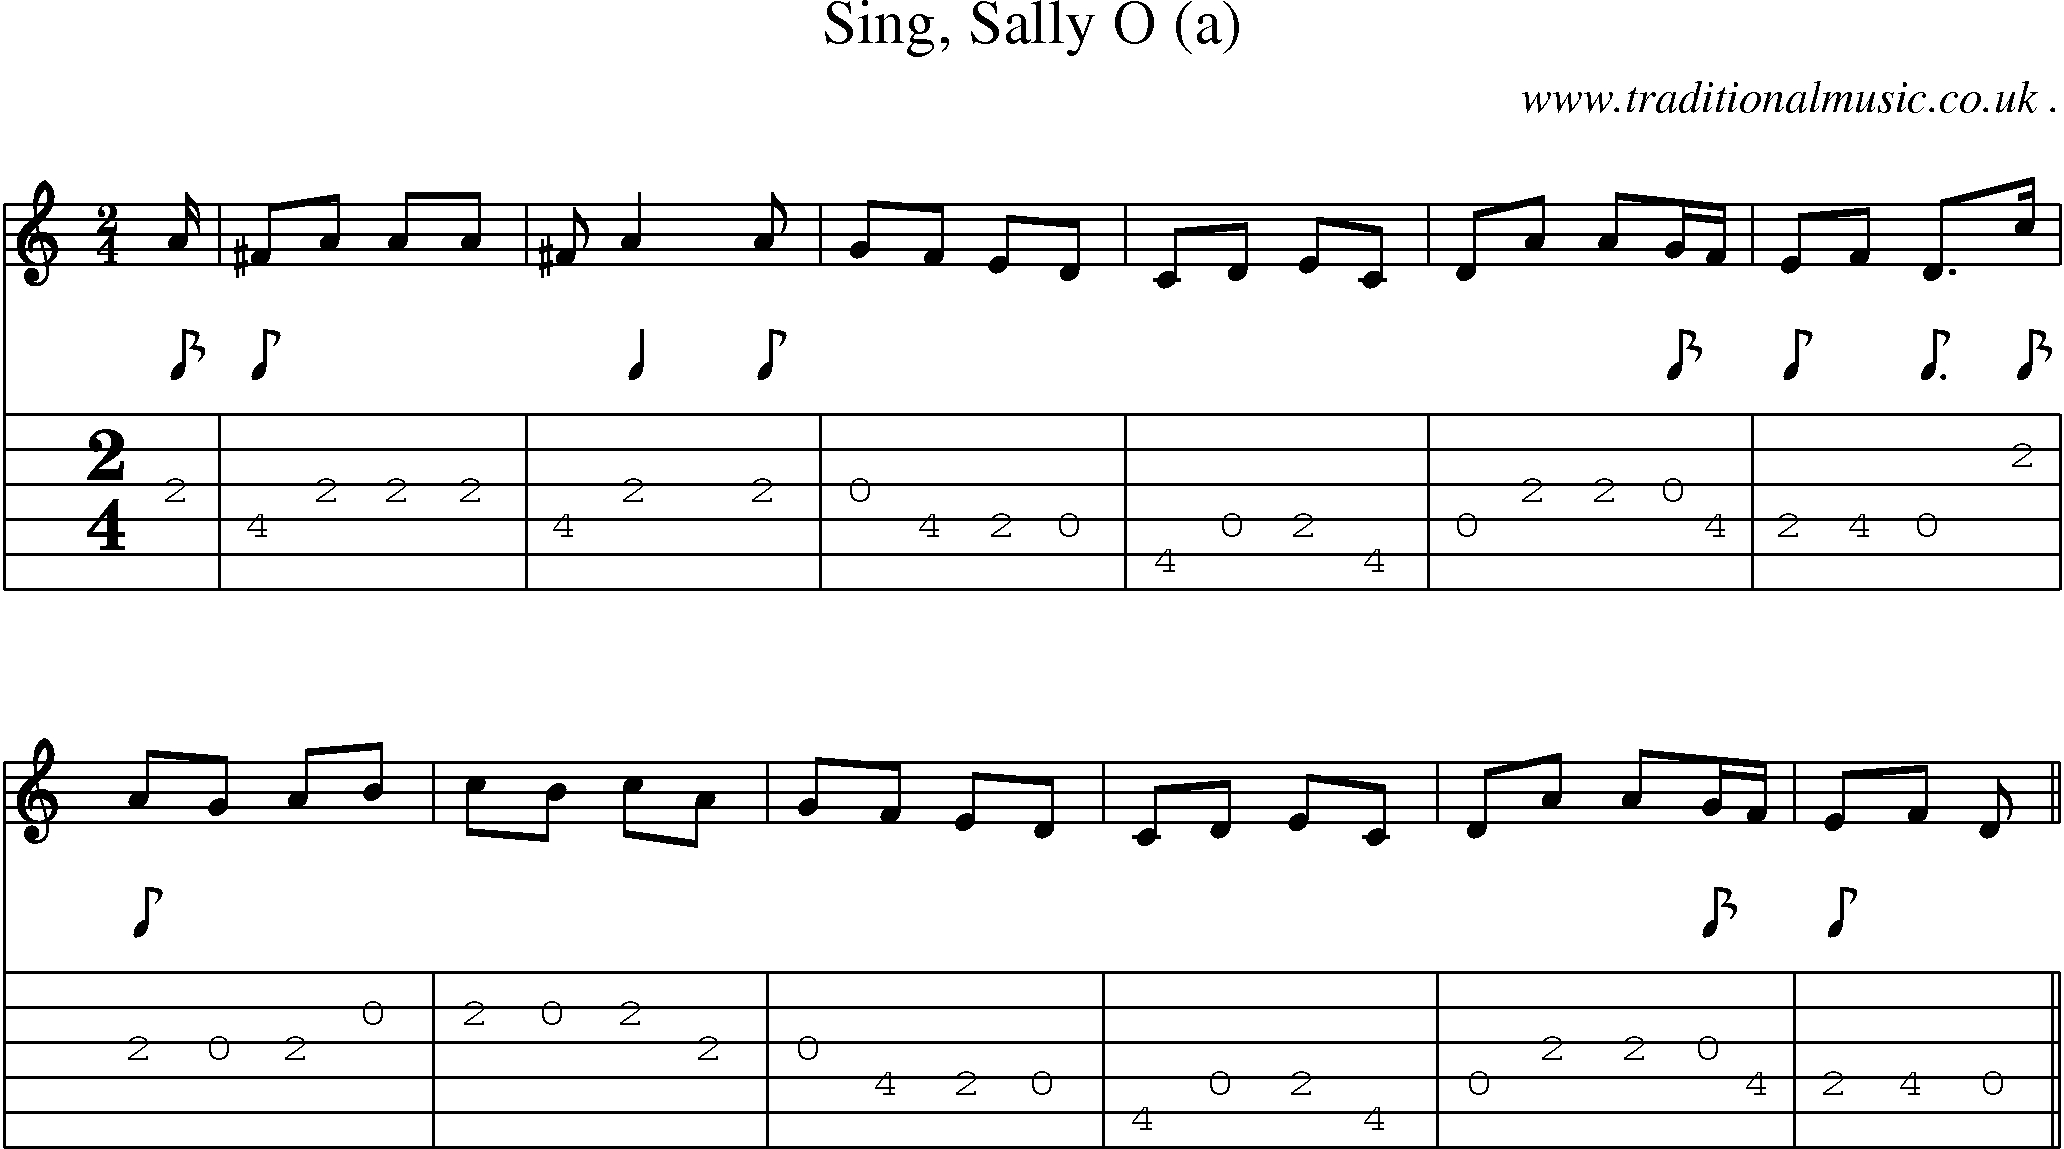 Sheet-Music and Guitar Tabs for Sing Sally O (a)